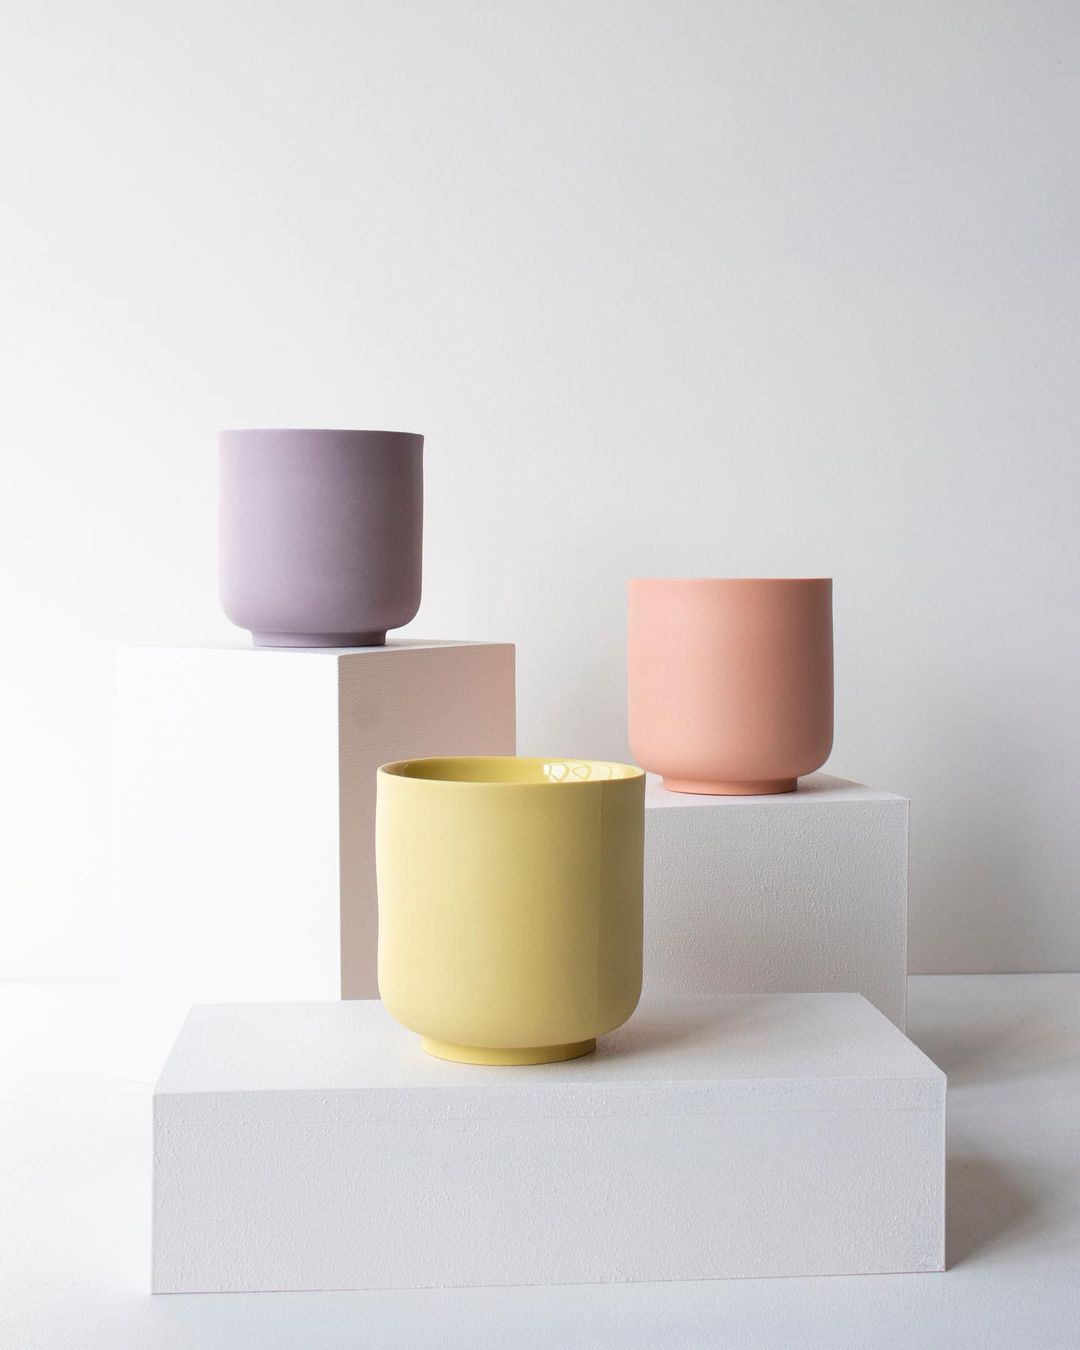 Pastel porcelain pots by Modesign in Istanbul